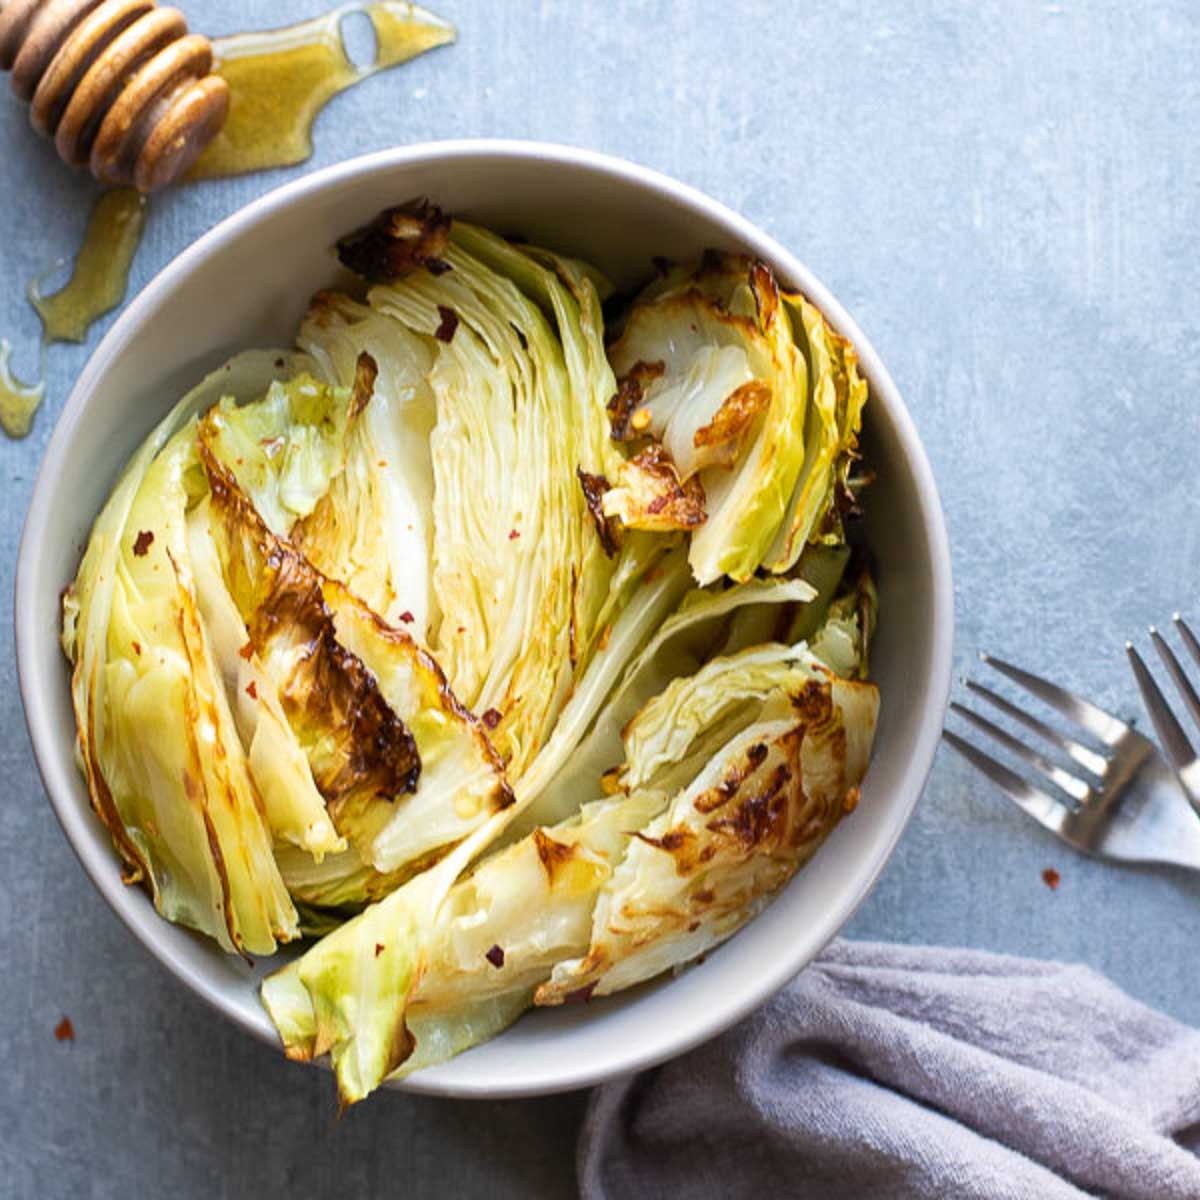 Bowl of roasted cabbage with a spool of hone on the side.